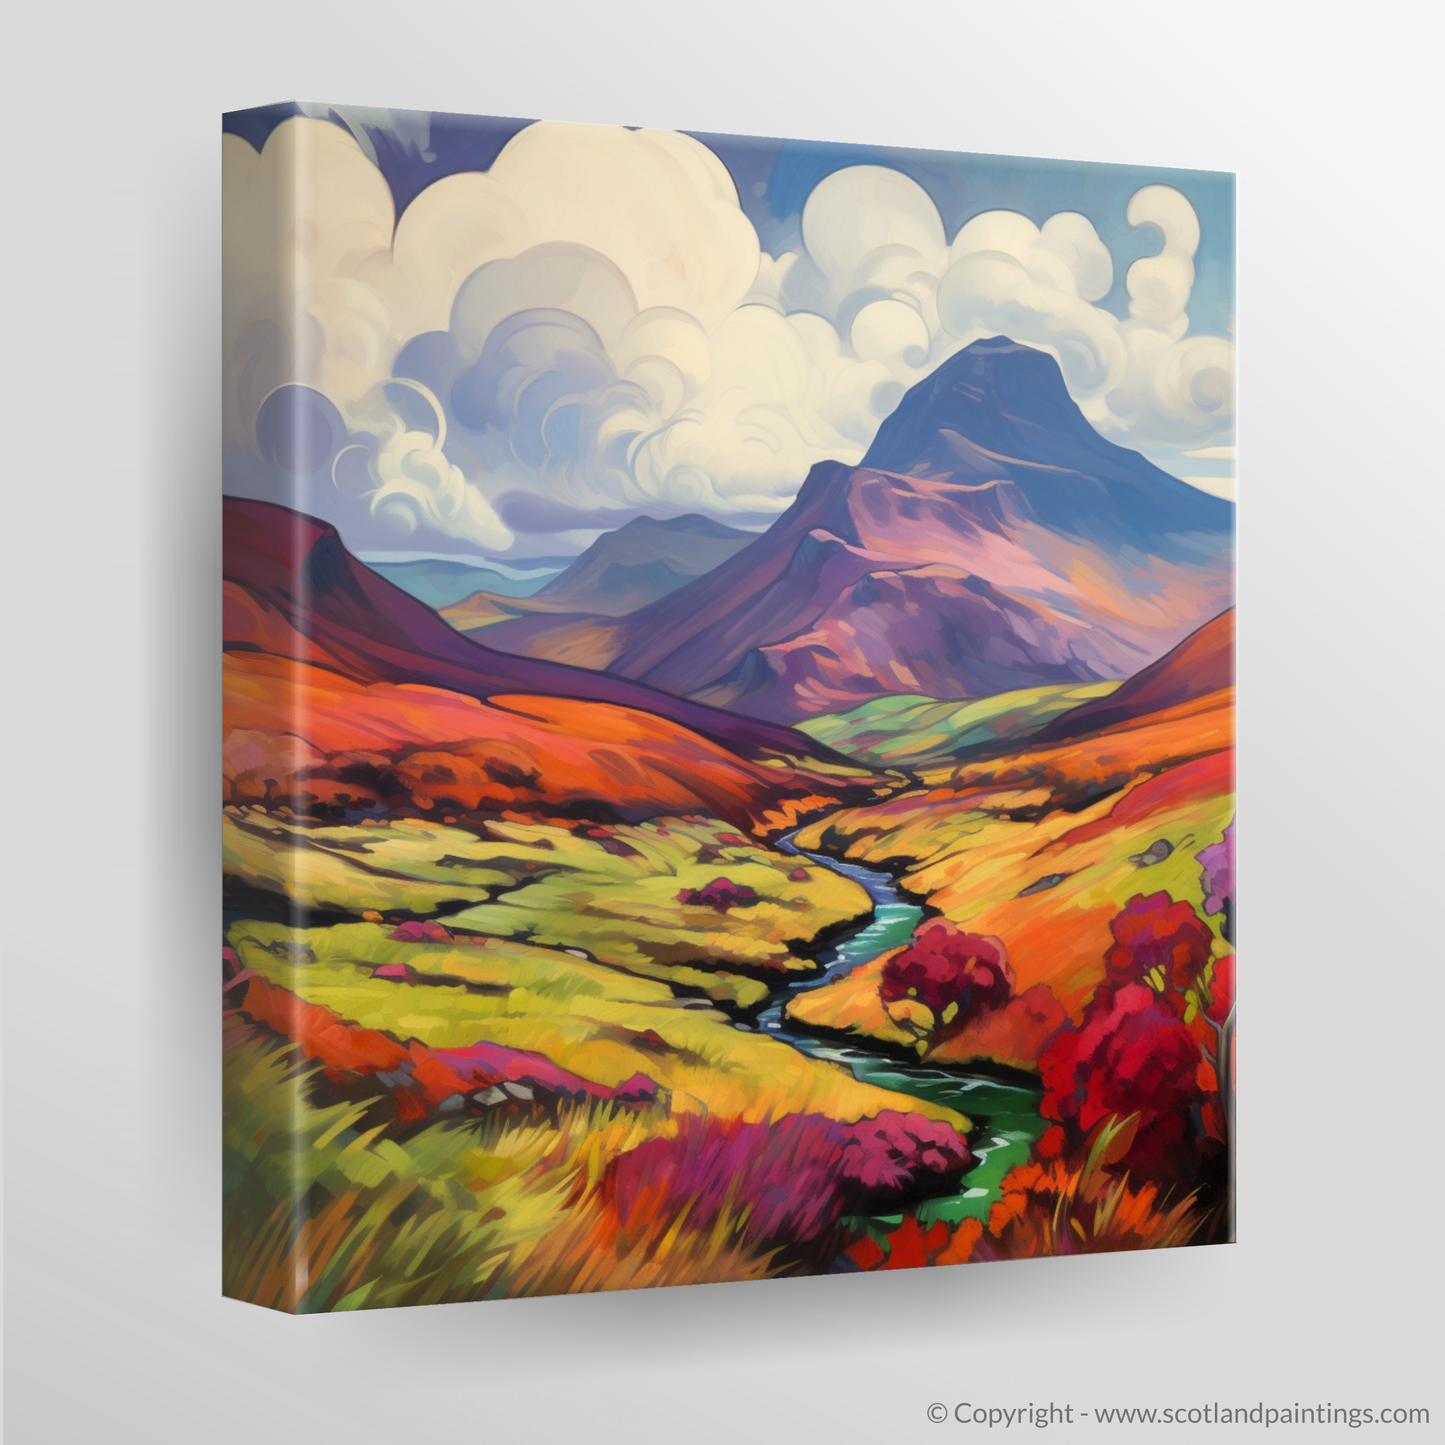 Majestic Meall nan Tarmachan: A Fauvist Ode to Scottish Wilds